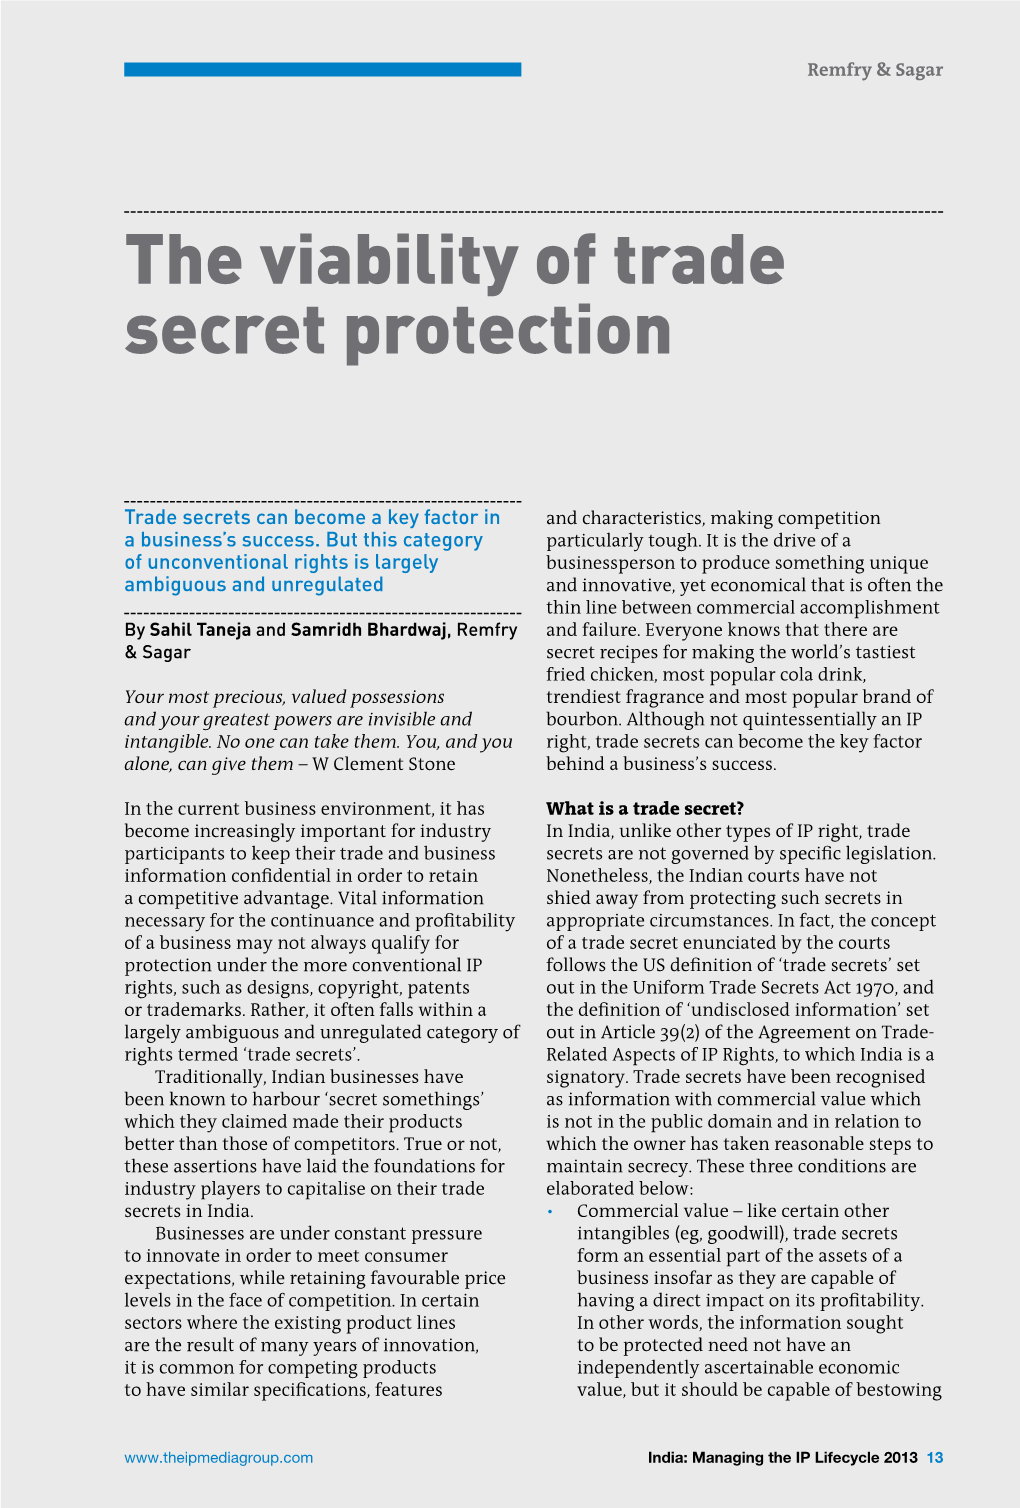 The Viability of Trade Secret Protection